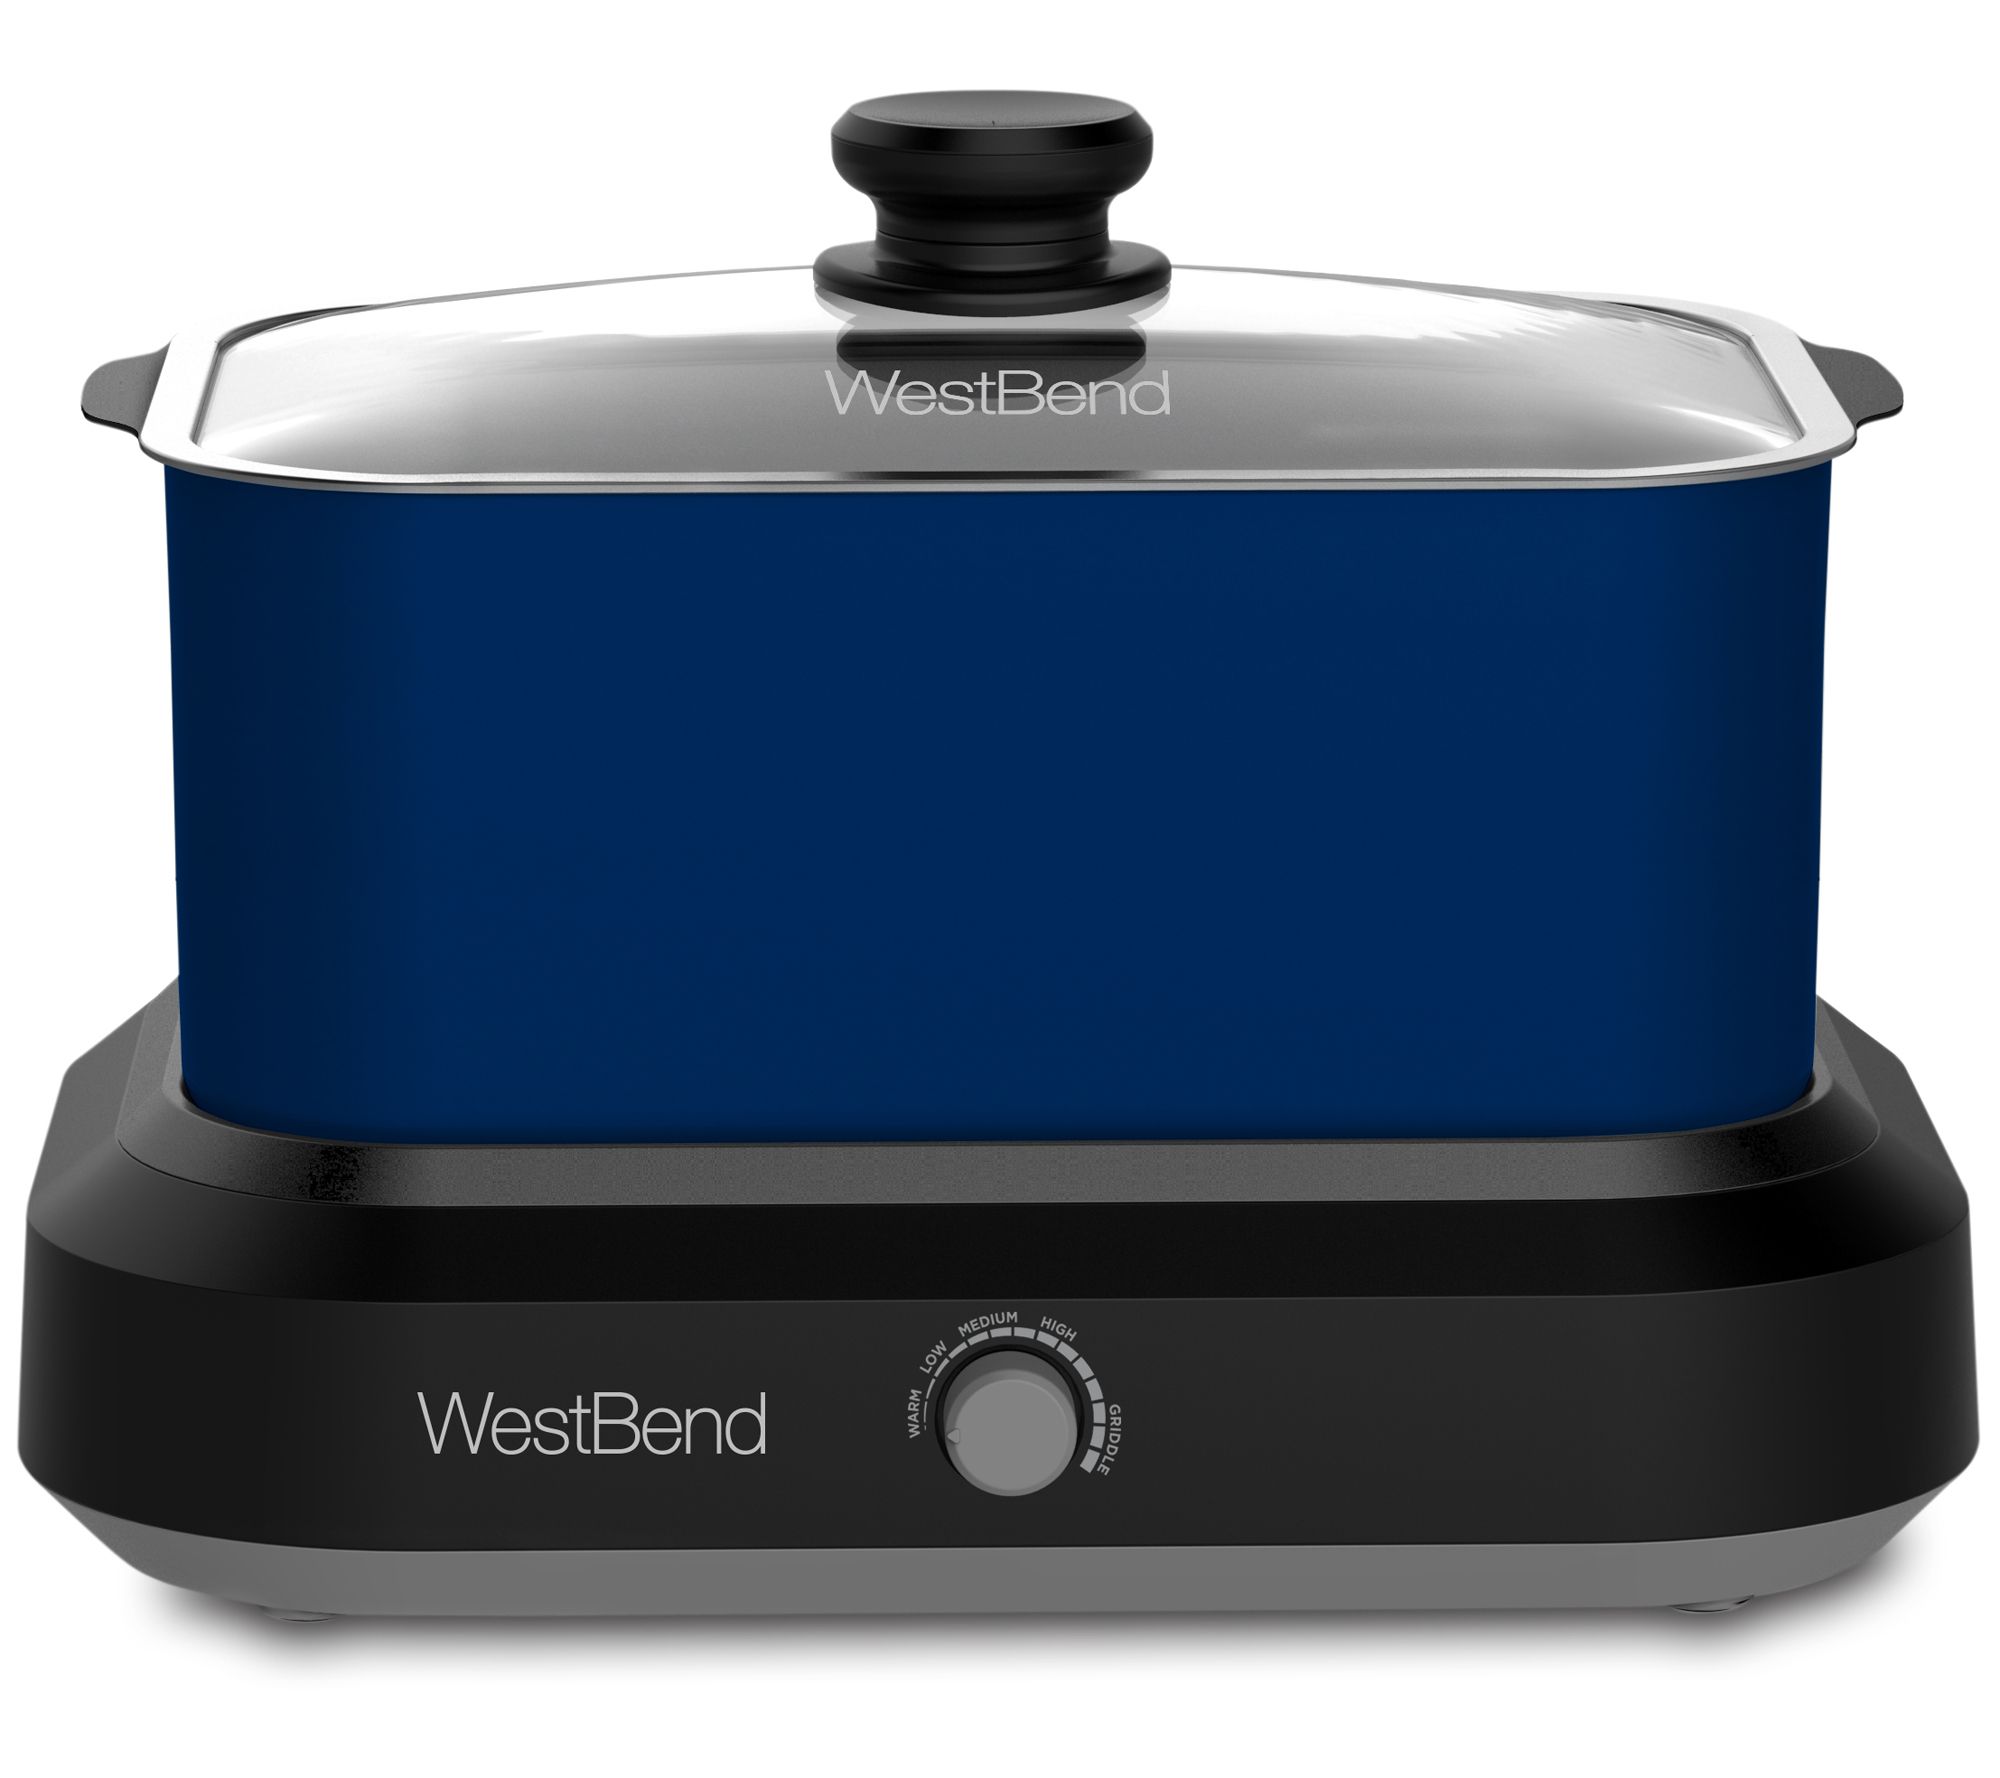 WestBend WestBend 6 Qt. Versatility Slow Cooker with Tote in Red